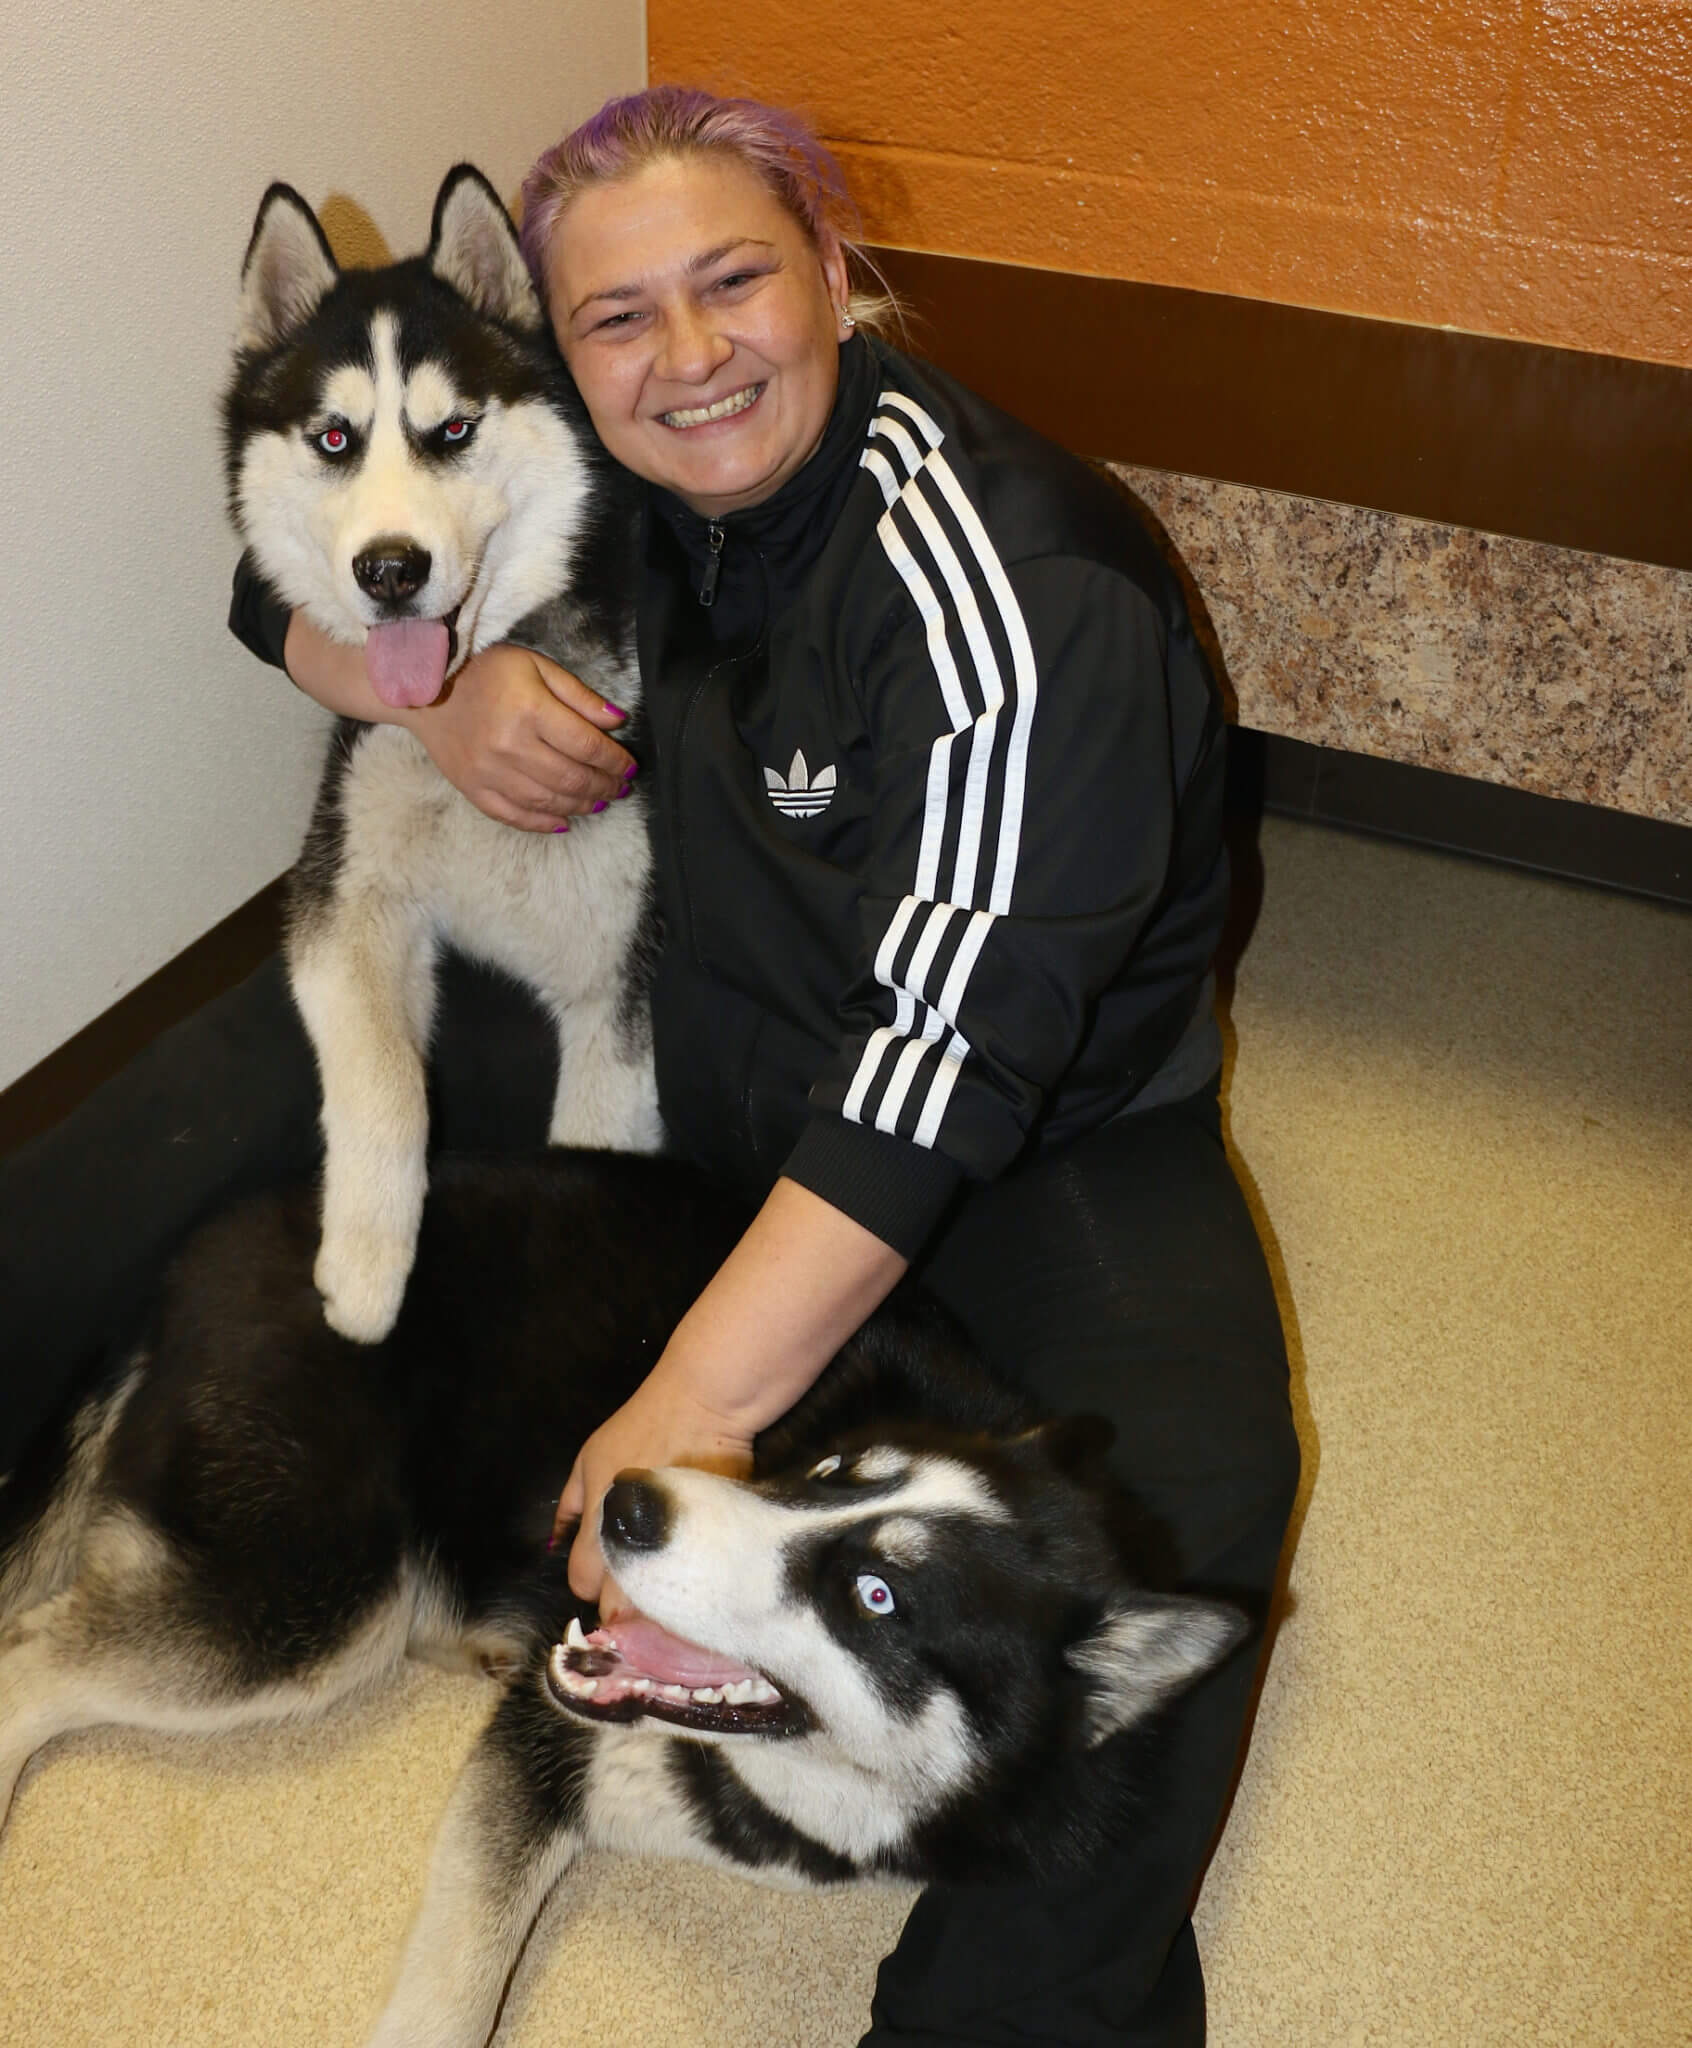 We have many pet lovers in our community, and we want to work with them to keep animals in their homes. These two huskies were ecstatic to be reunited with their owner after they were lost. 